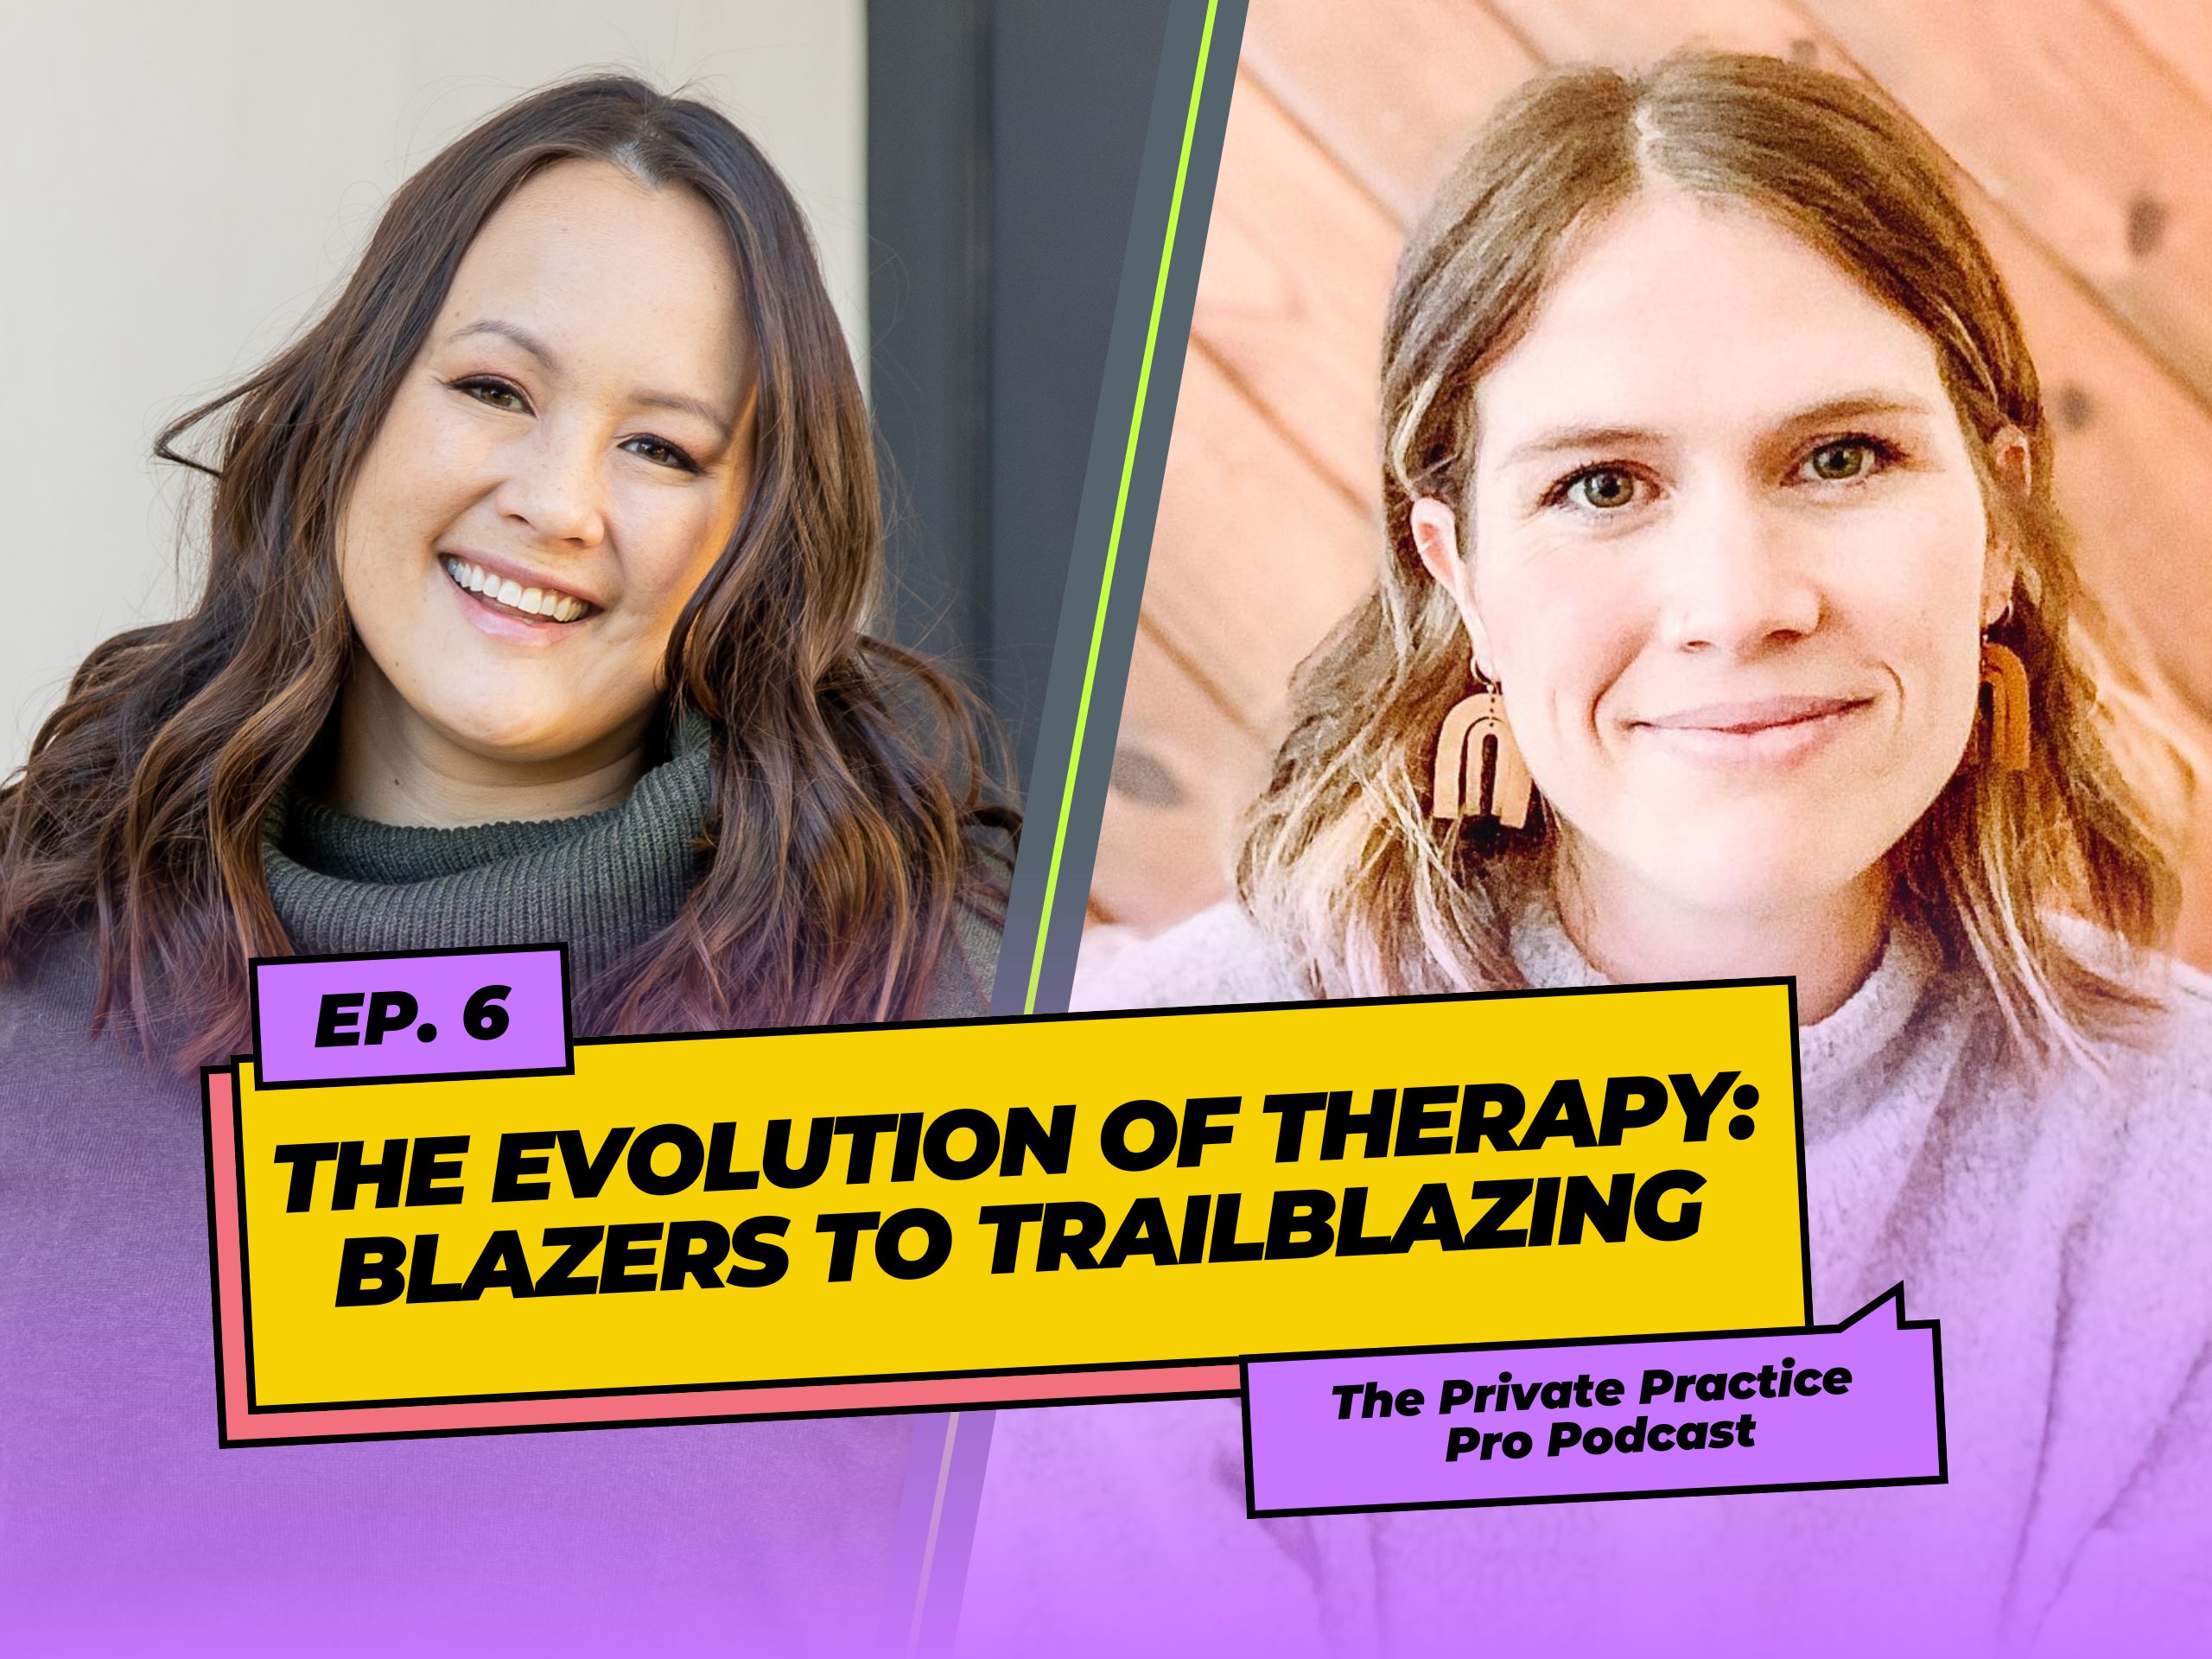 Blazers to Trailblazing A New Era for Therapists - The Private Practice Pro Kelley Stevens, LMFTOver Fear A Systematic Approach to Your Dream Career - The Private Practice Pro Kelley Stevens, LM